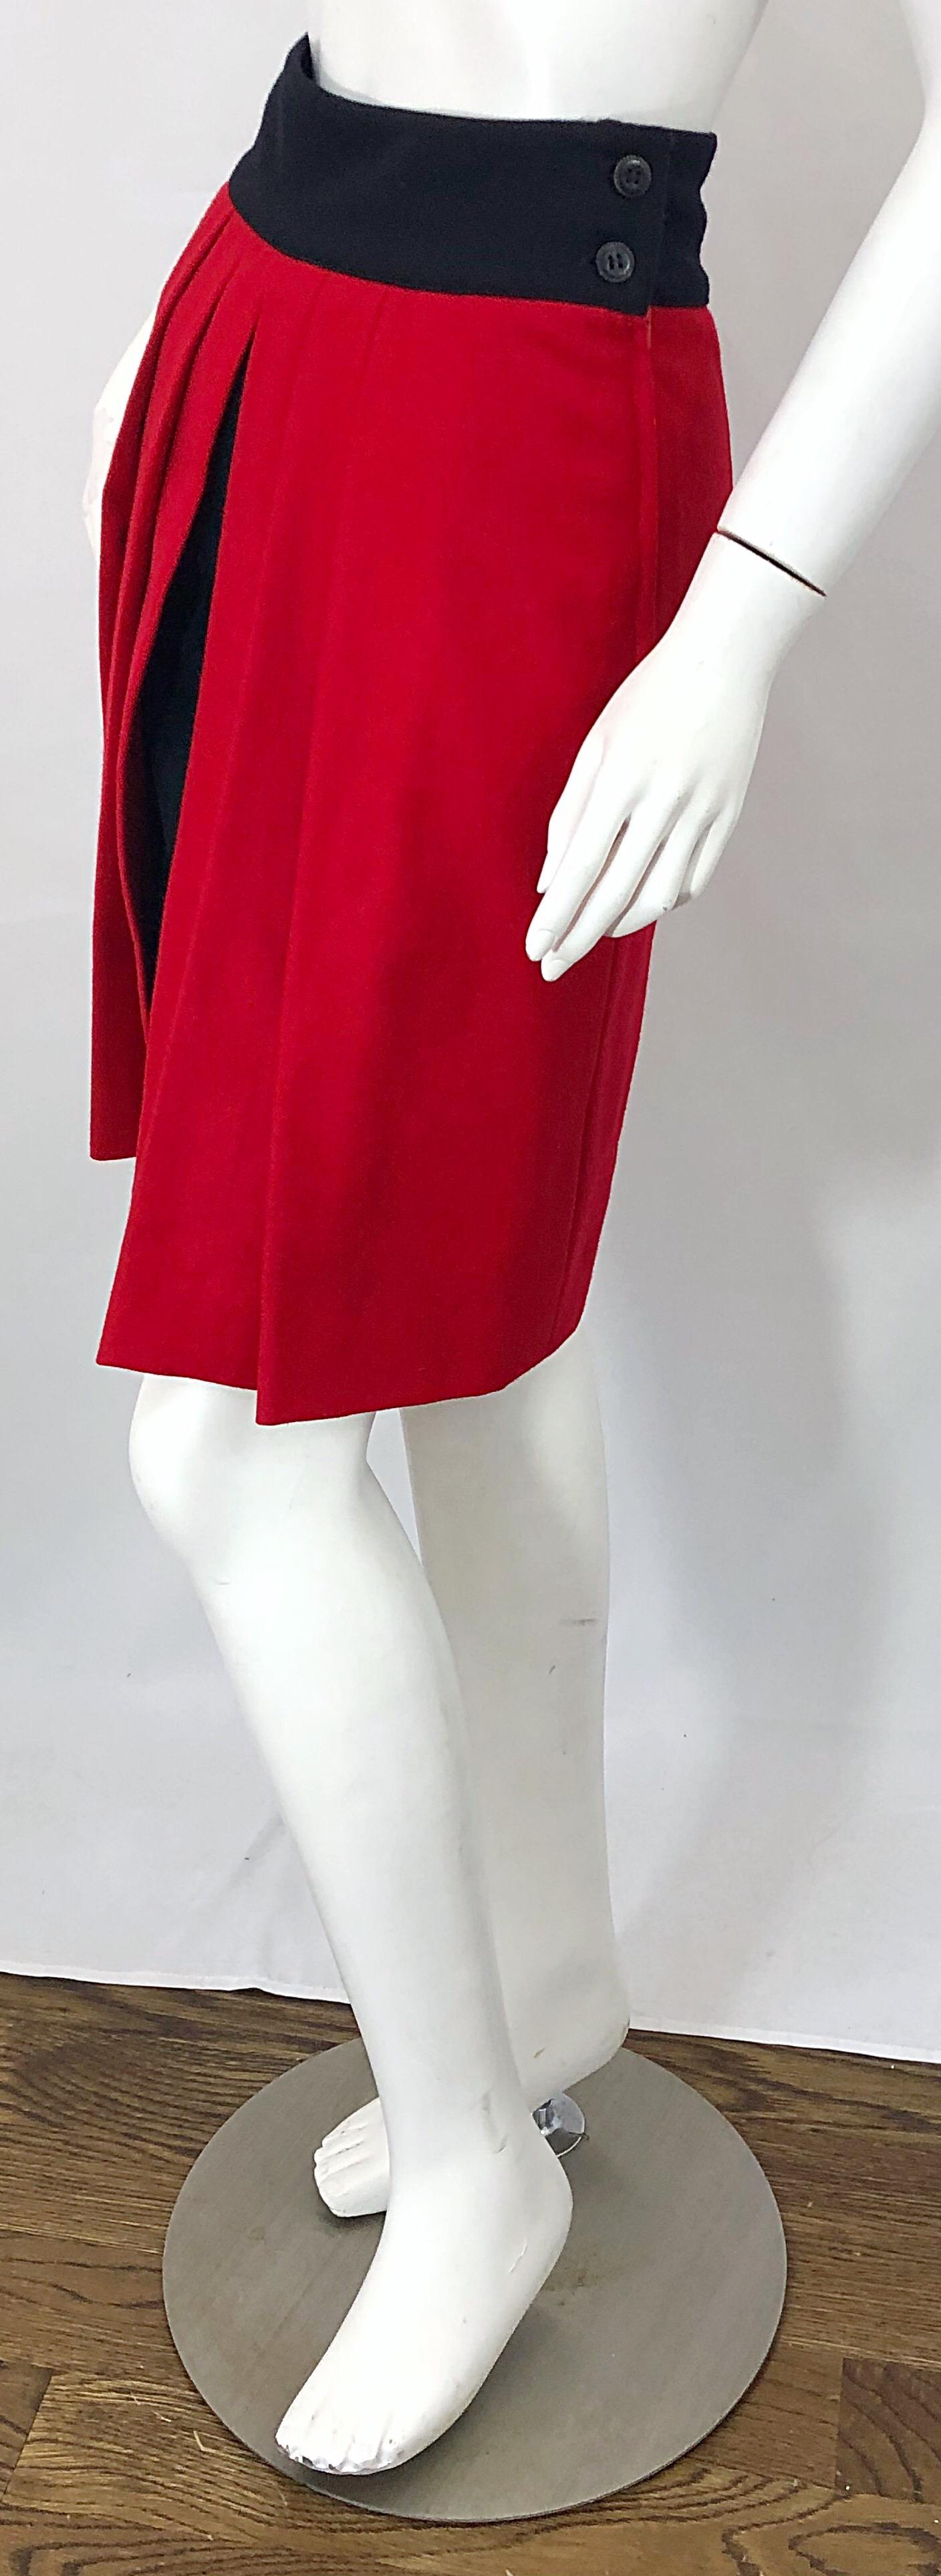 Gianni Versace for Genny Lipstick Red + Black 1980s Vintage 80s Pencil Skirt  In Excellent Condition For Sale In San Diego, CA